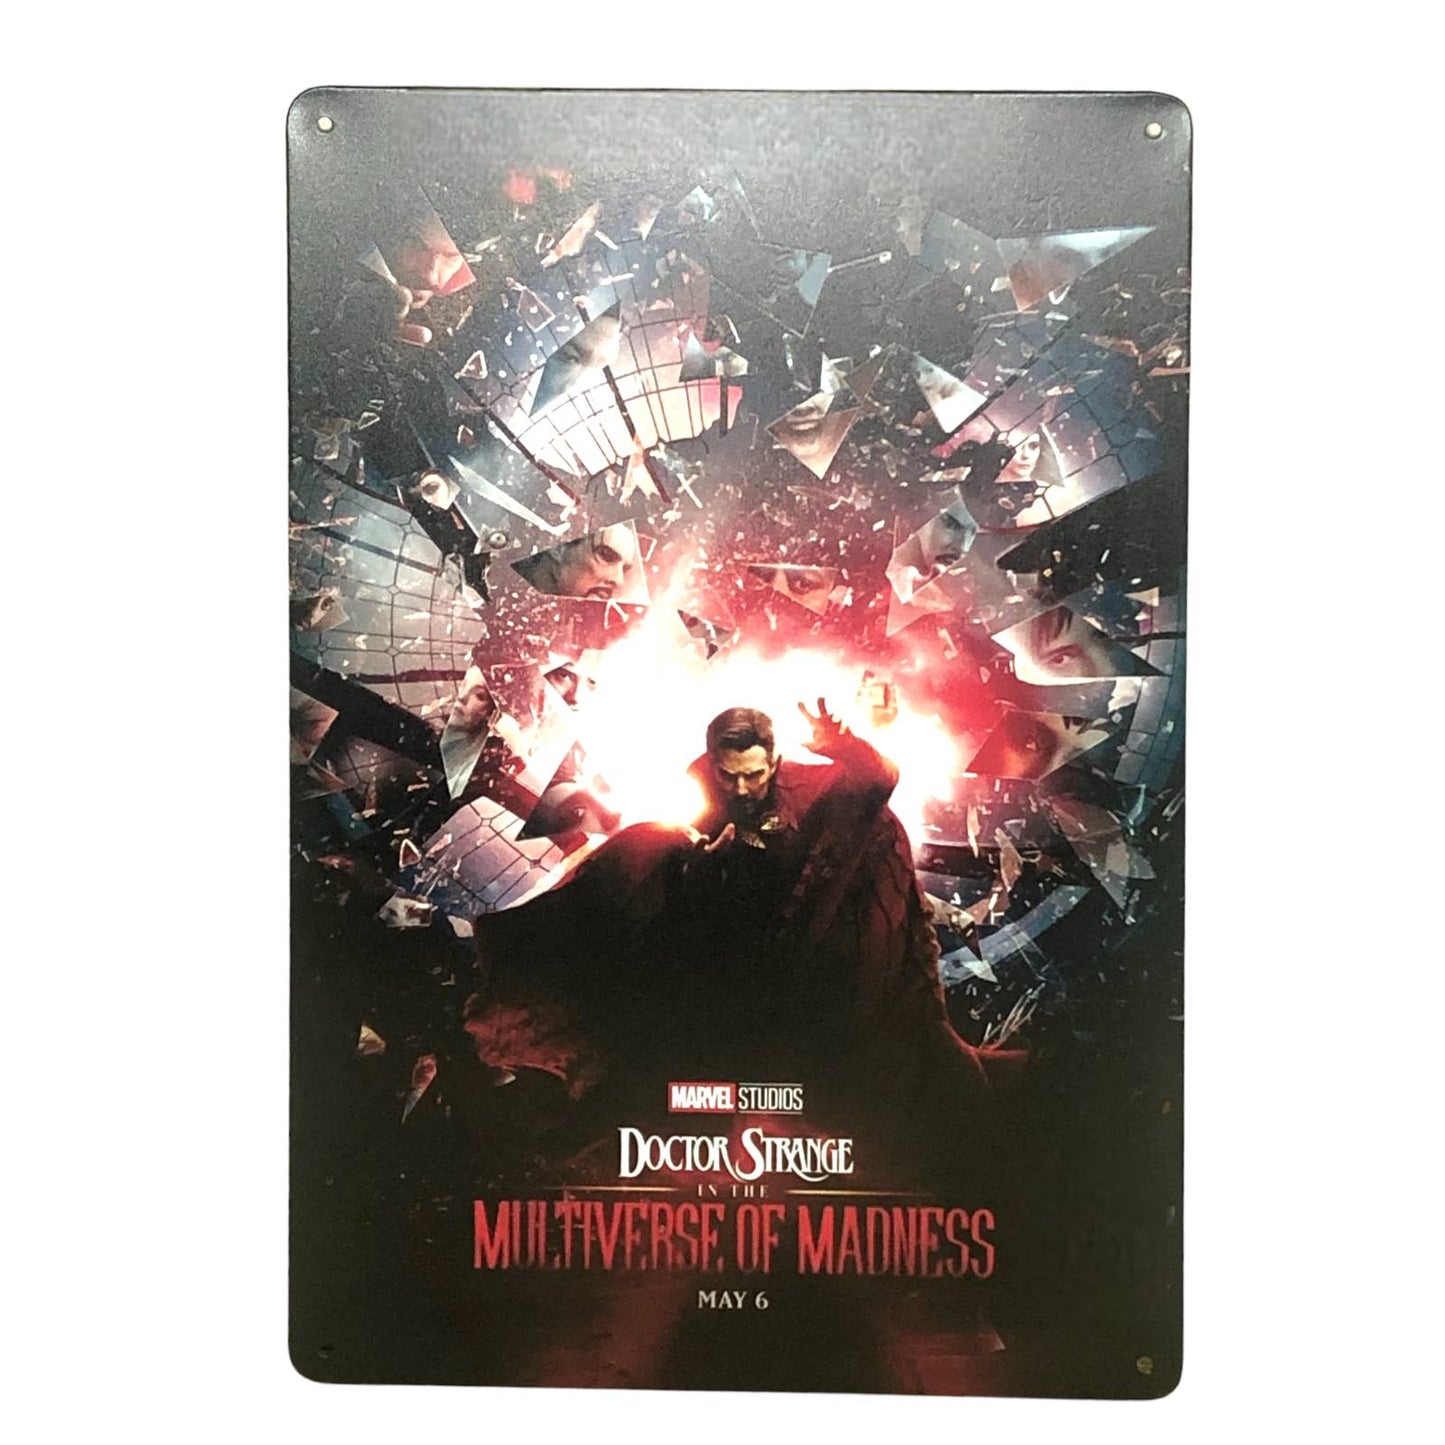 Doctor Strange in the Multiverse of Madness Movie Poster Metal Tin Sign 8"x12"